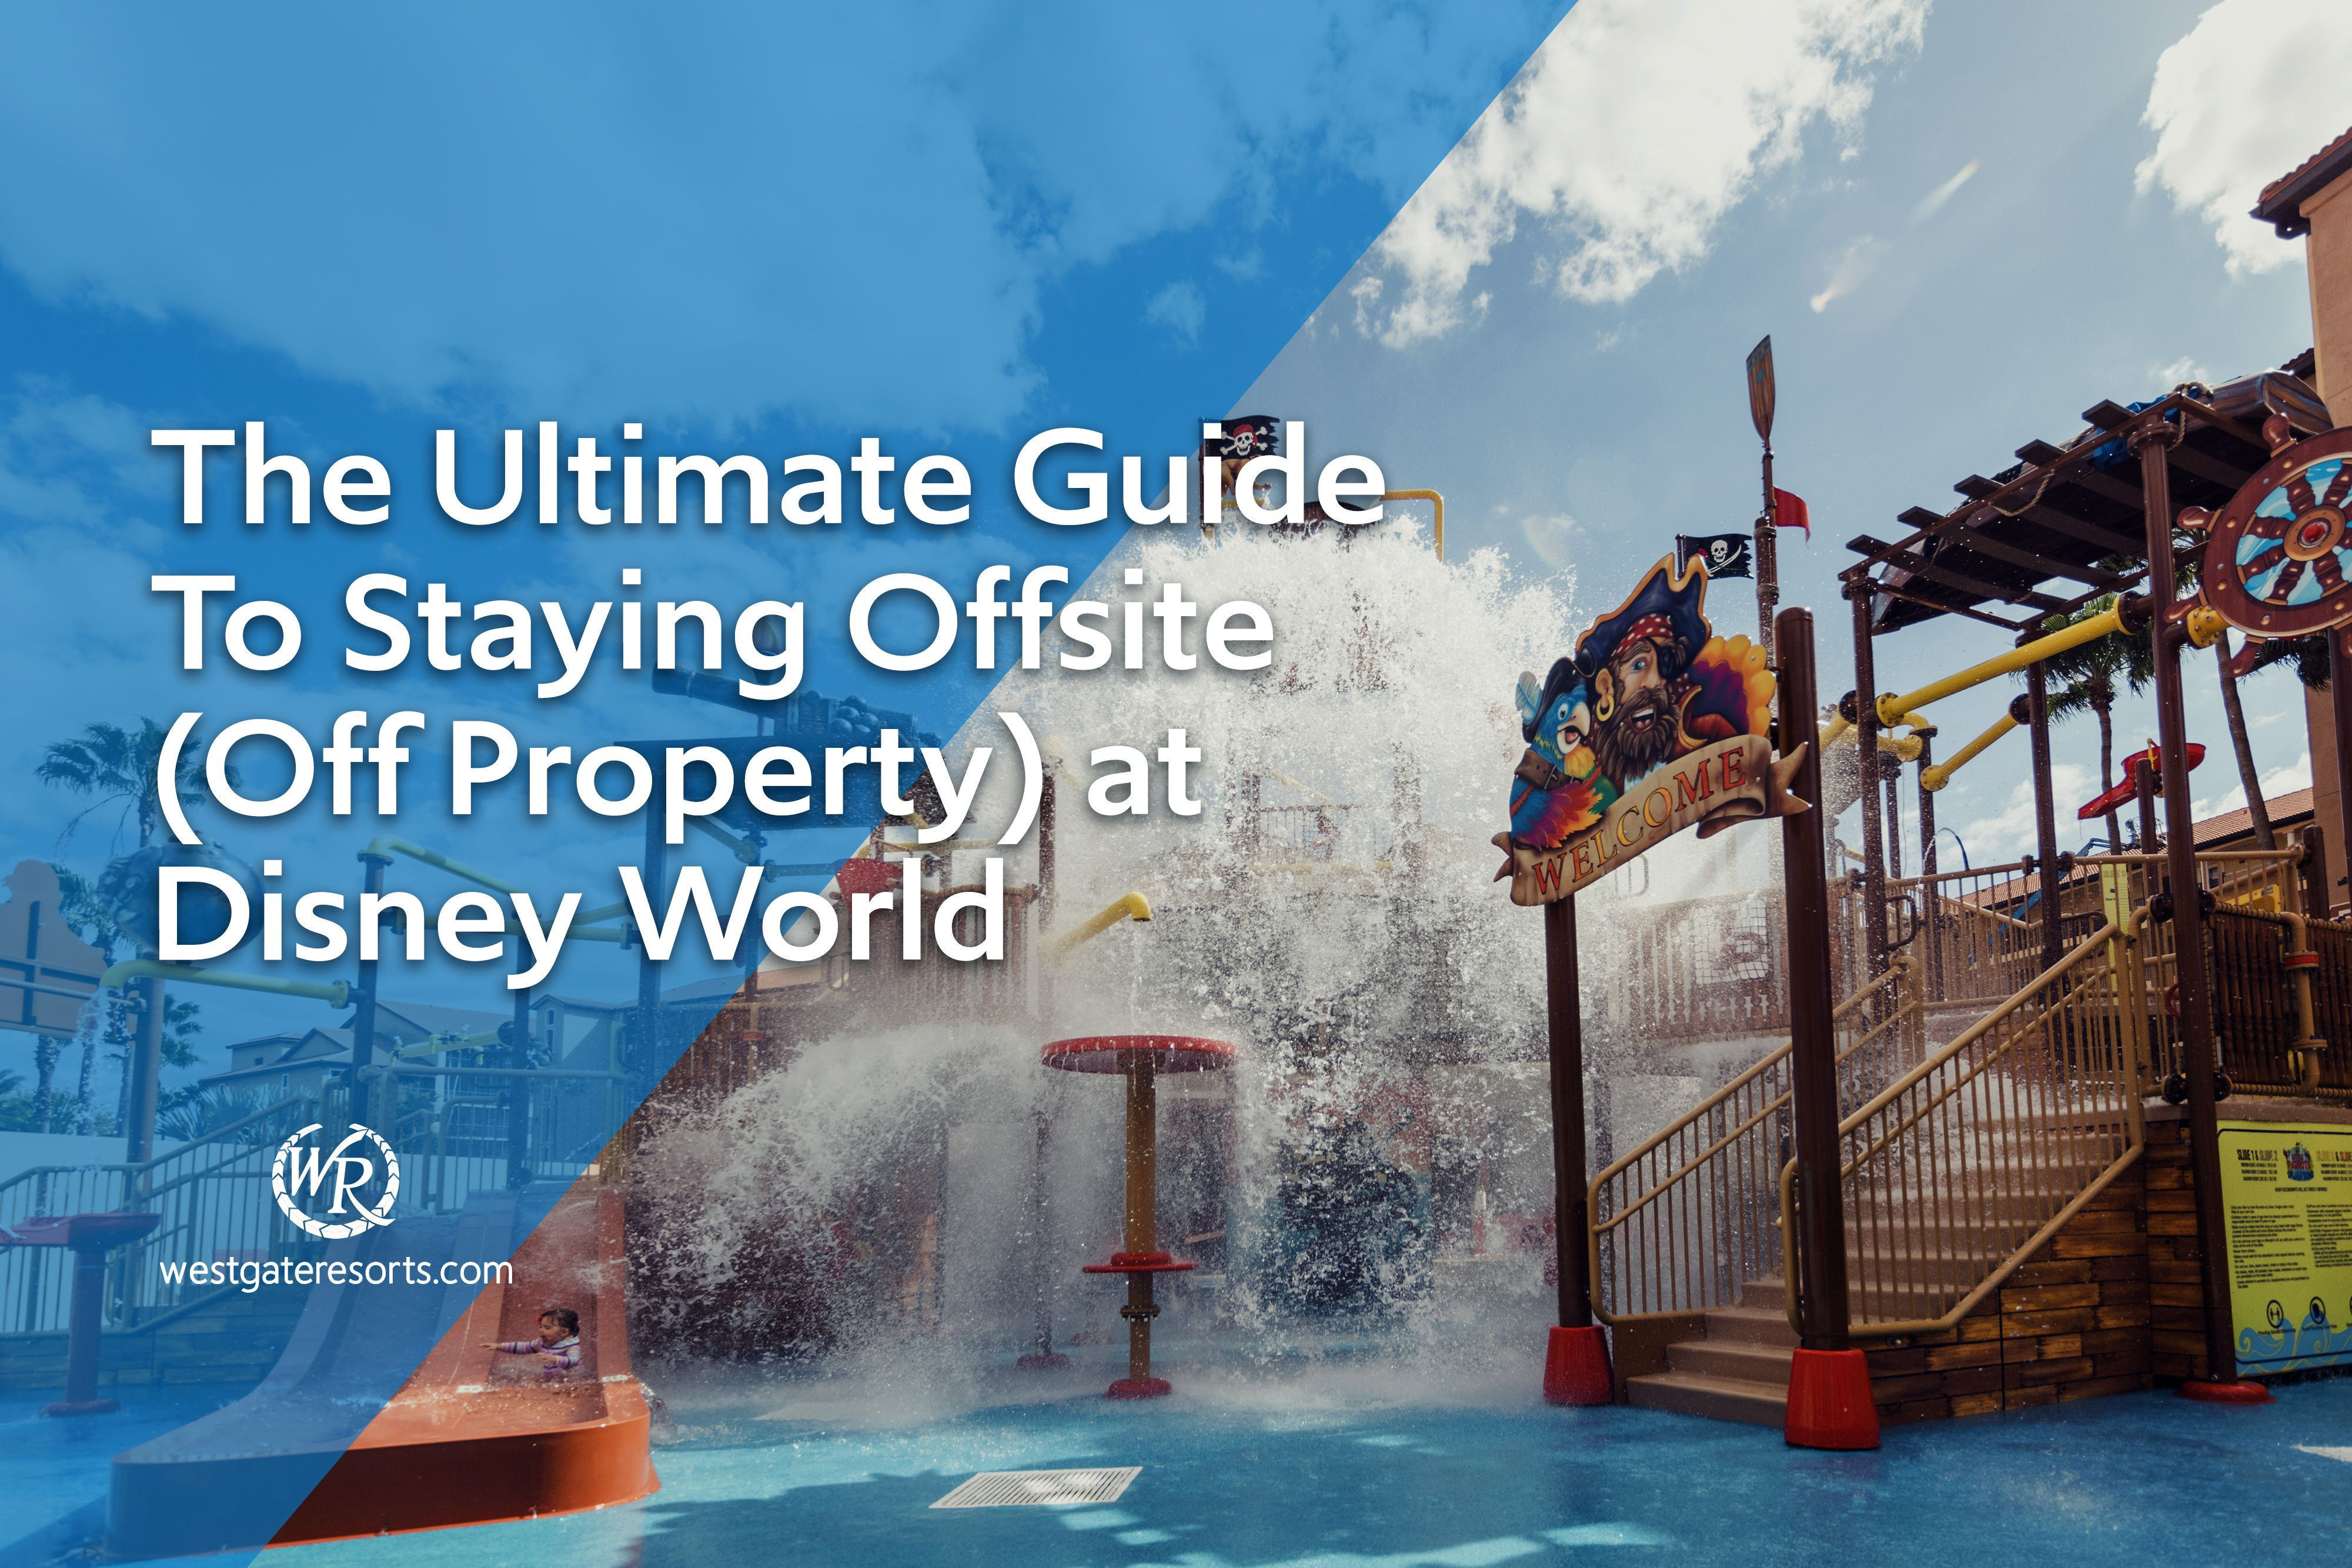 The Ultimate Guide To Staying Offsite (Off Property) at Disney World